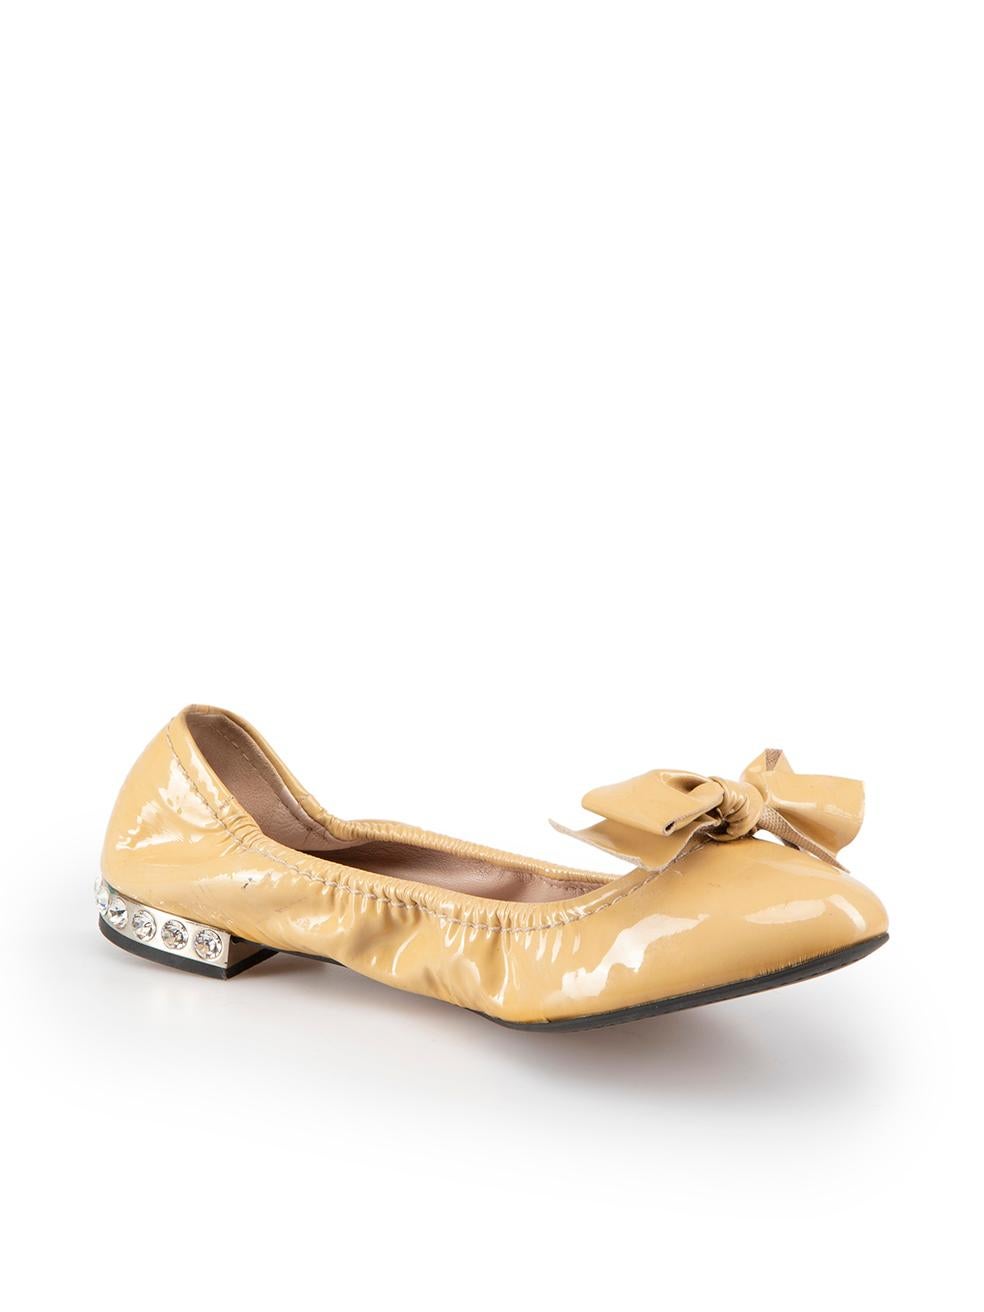 CONDITION is Good. General wear to flats is evident. Moderate signs of wear to overall shoes with discoloured marks to outer leather, creasing to inner sole and around toe creases and signs of wear to inner soles on this used Miu Miu designer resale